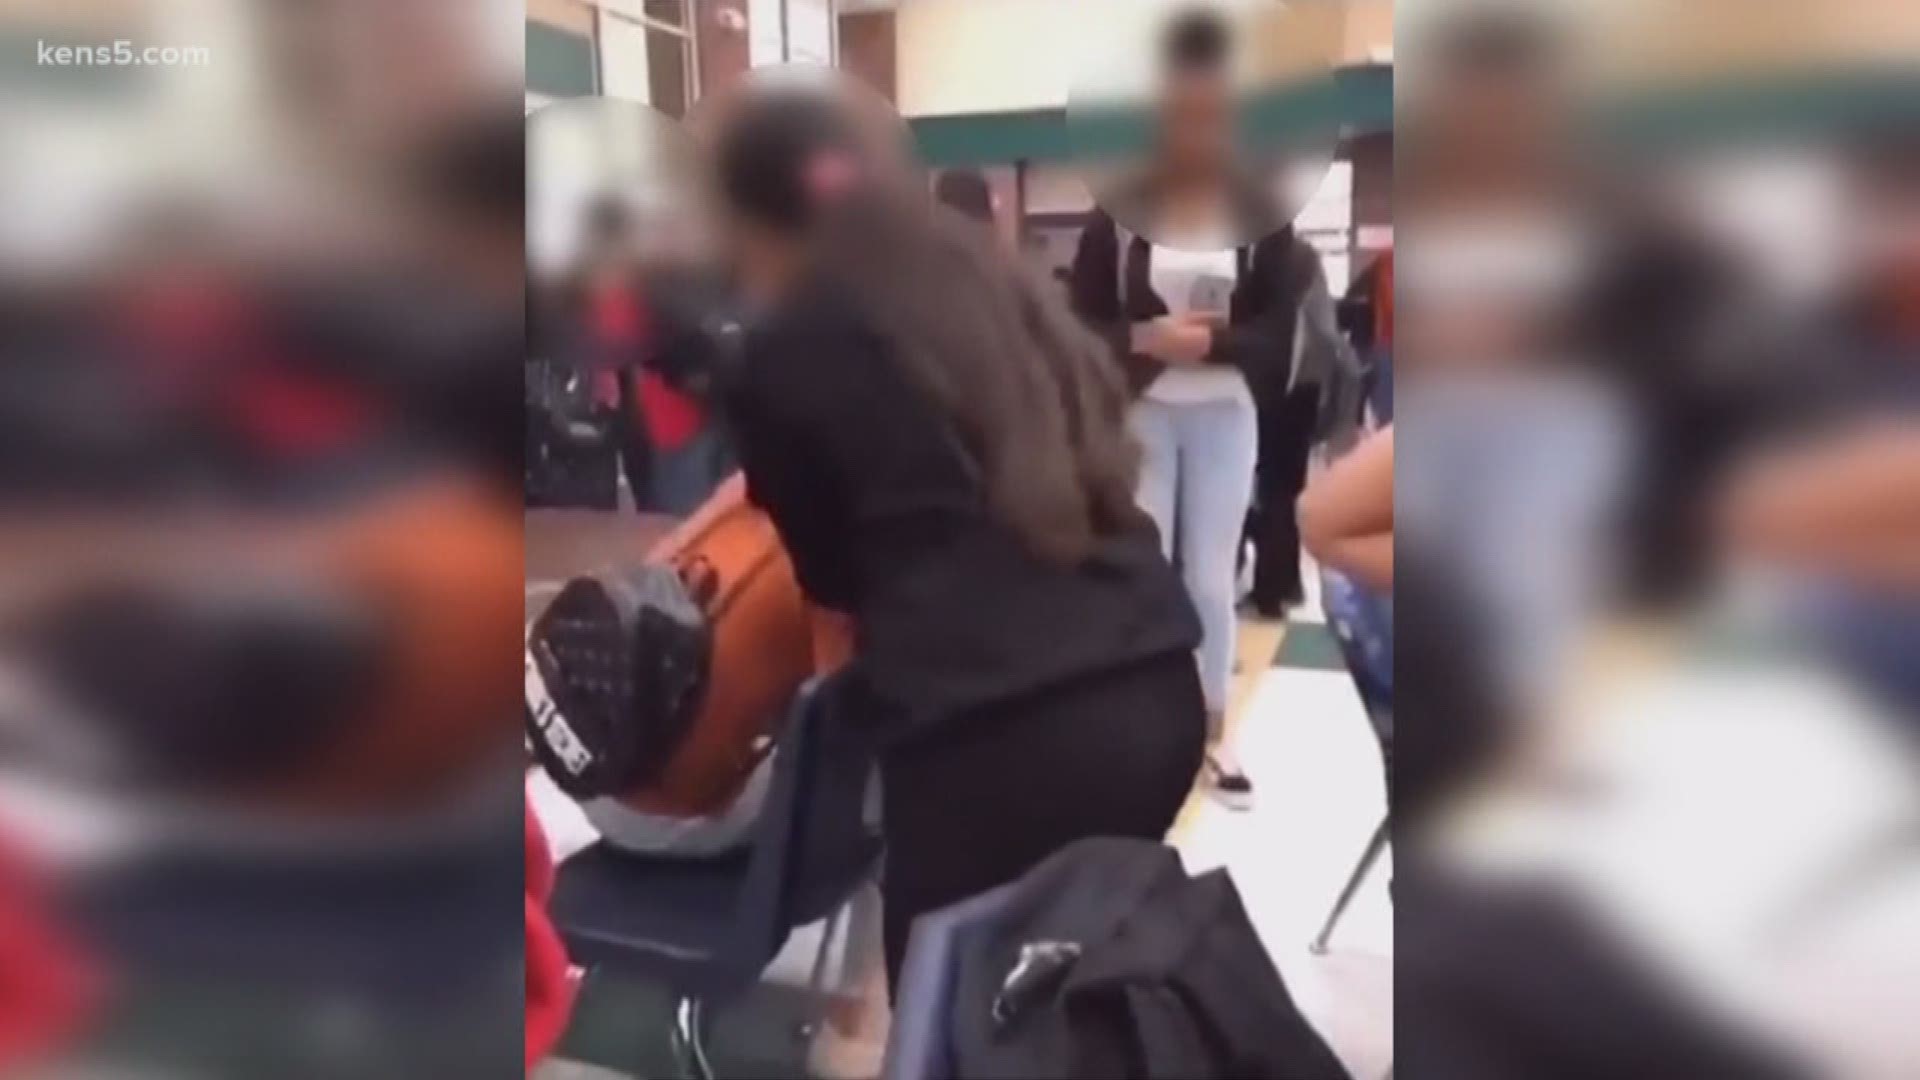 A violent attack in a middle school lunchroom—all caught on video. The victim’s mother is speaking out, and said she wonders why the school didn’t do more to protect her daughter.